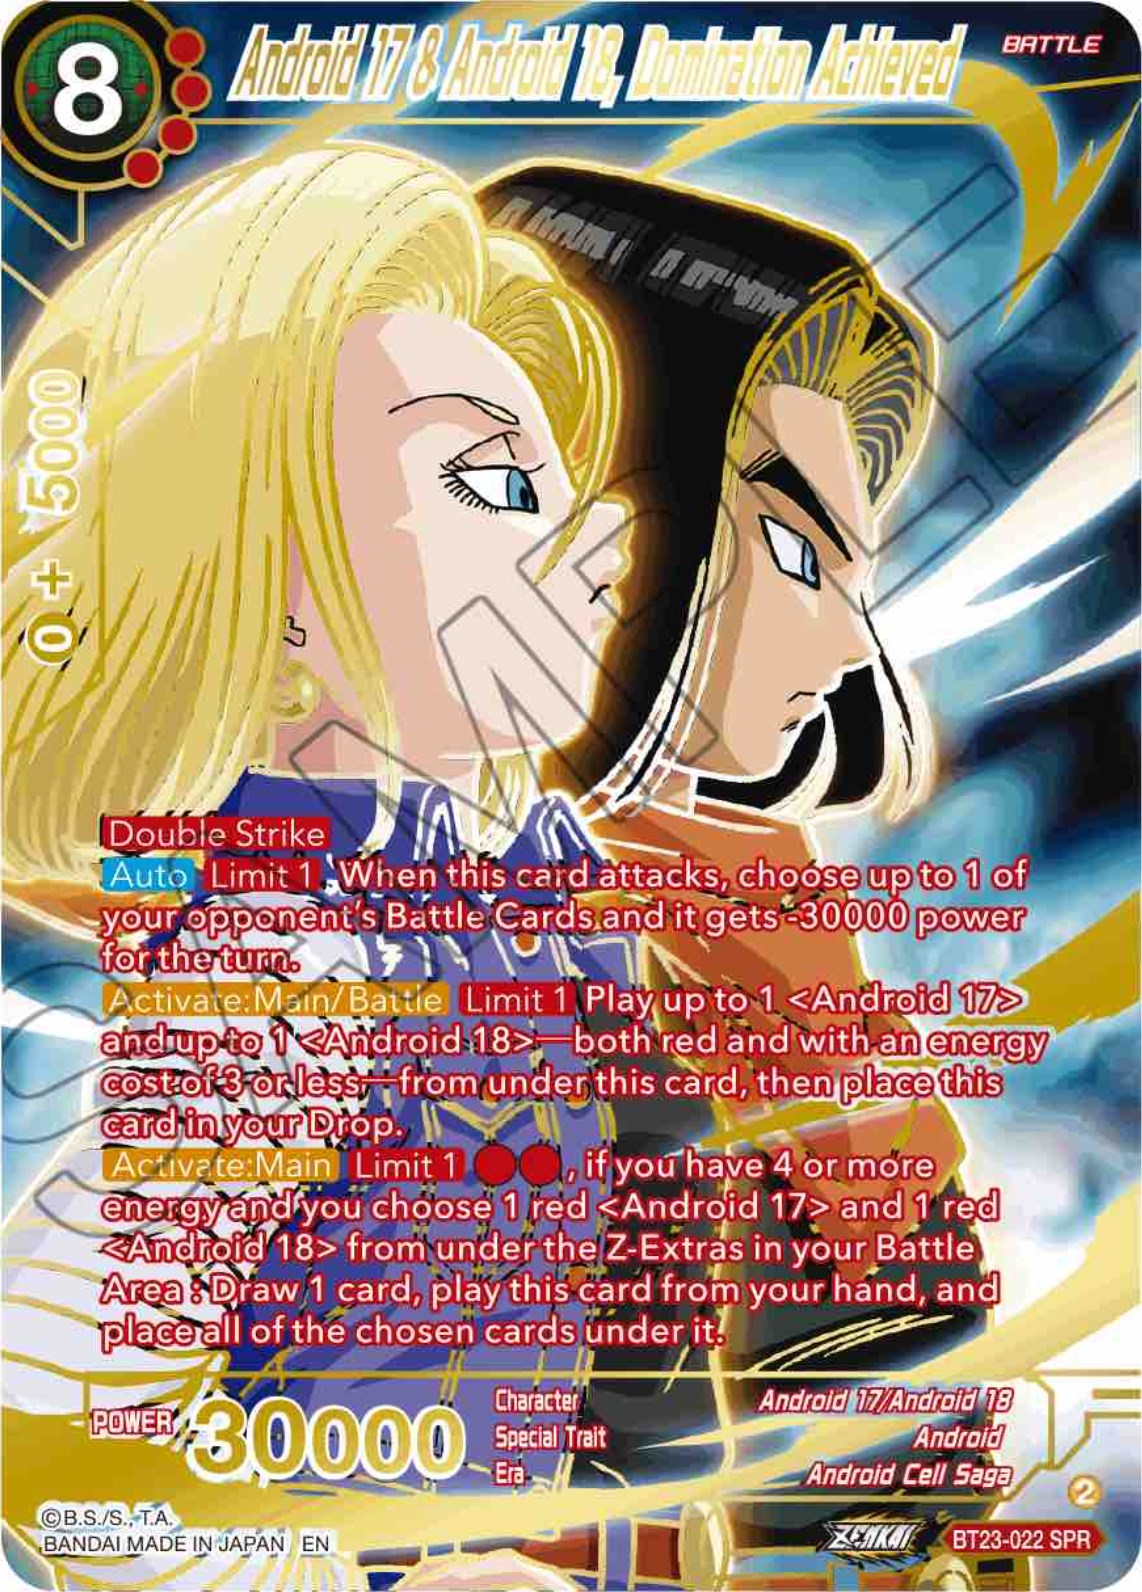 Android 17 & Android 18, Domination Achieved (SPR) (BT23-022) [Perfect Combination] | Mindsight Gaming